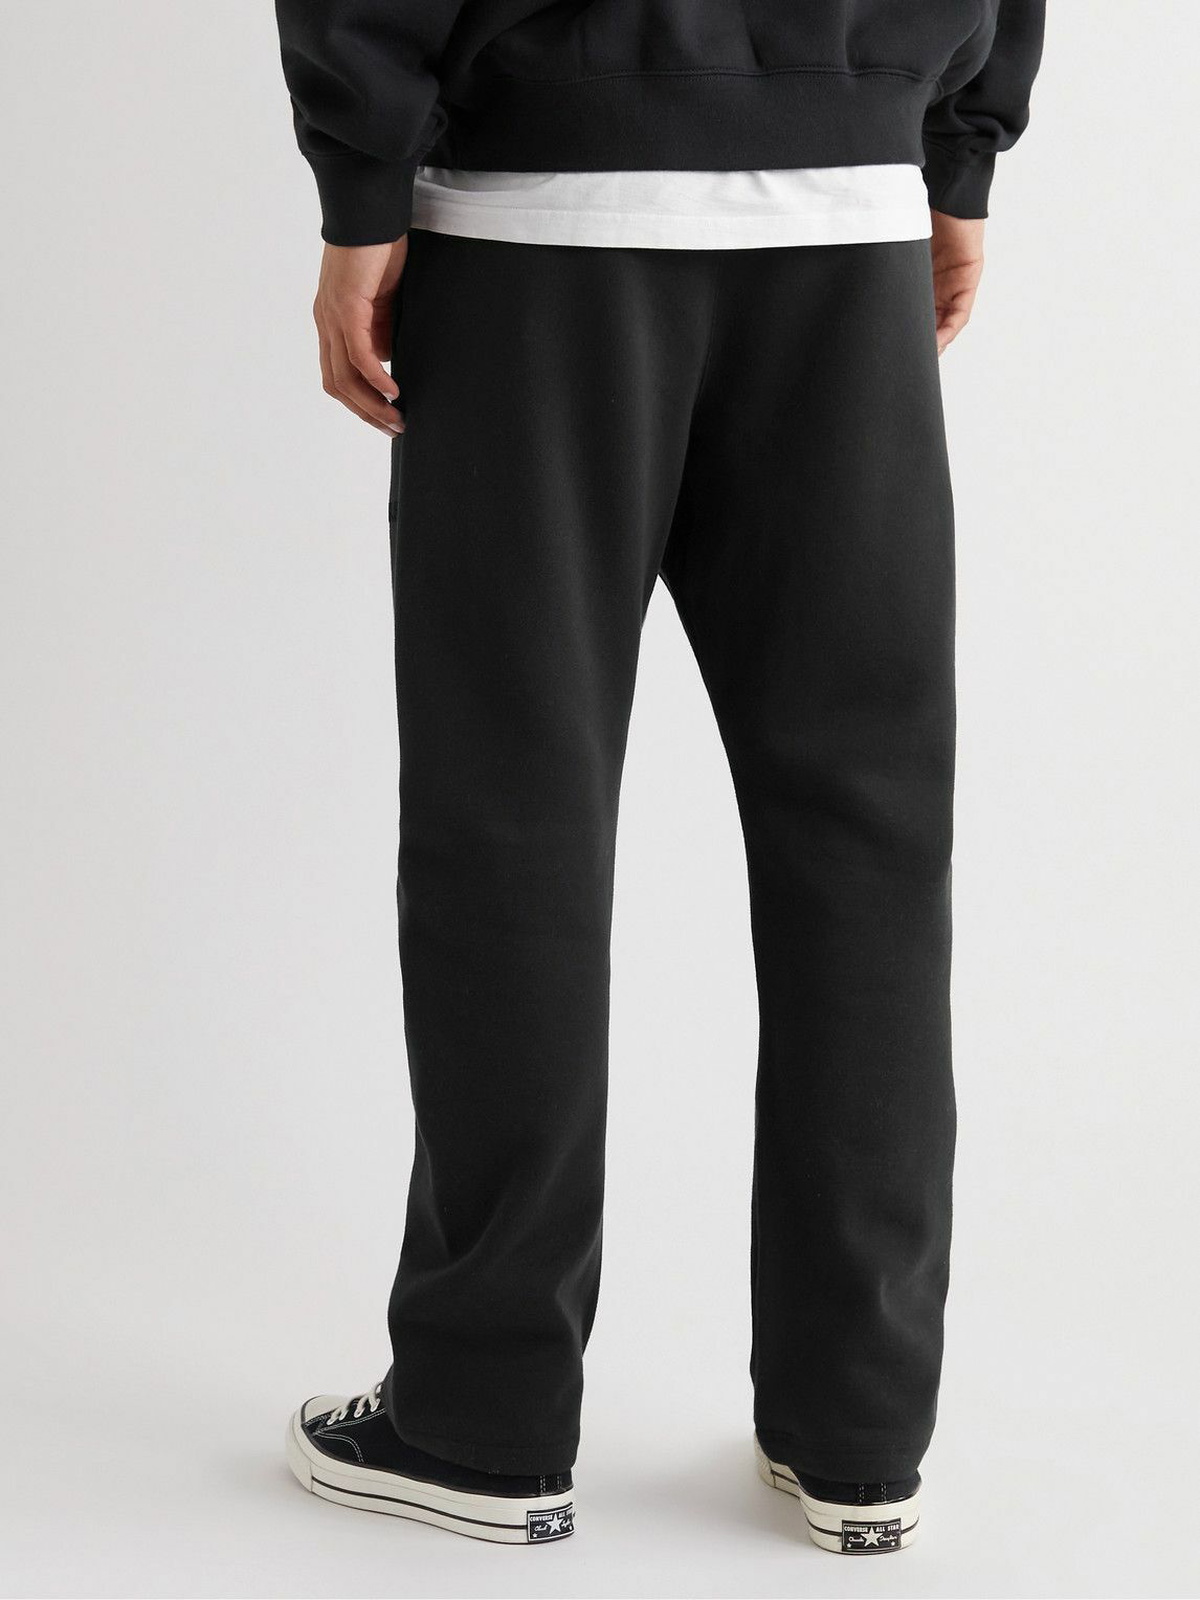 Straight-leg technical cotton jersey pants in Black for